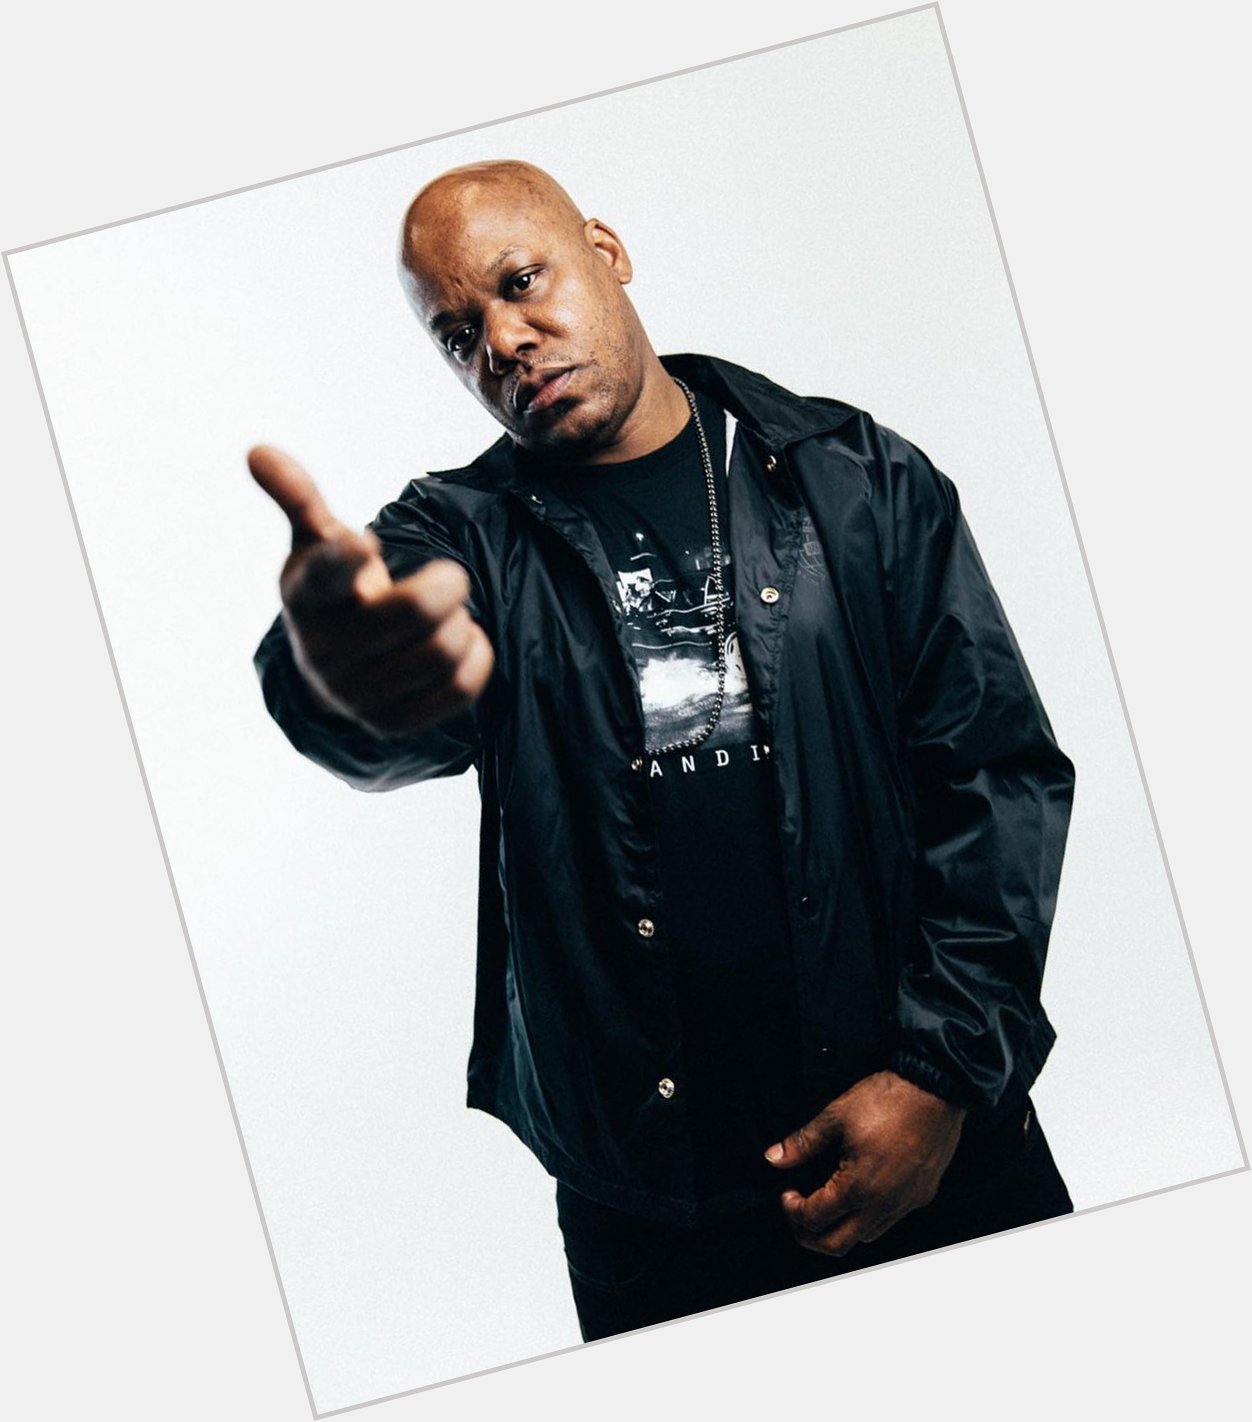 Happy Birthday to the OG LEGEND Too Short   What are yall favorite tracks from Short?! 